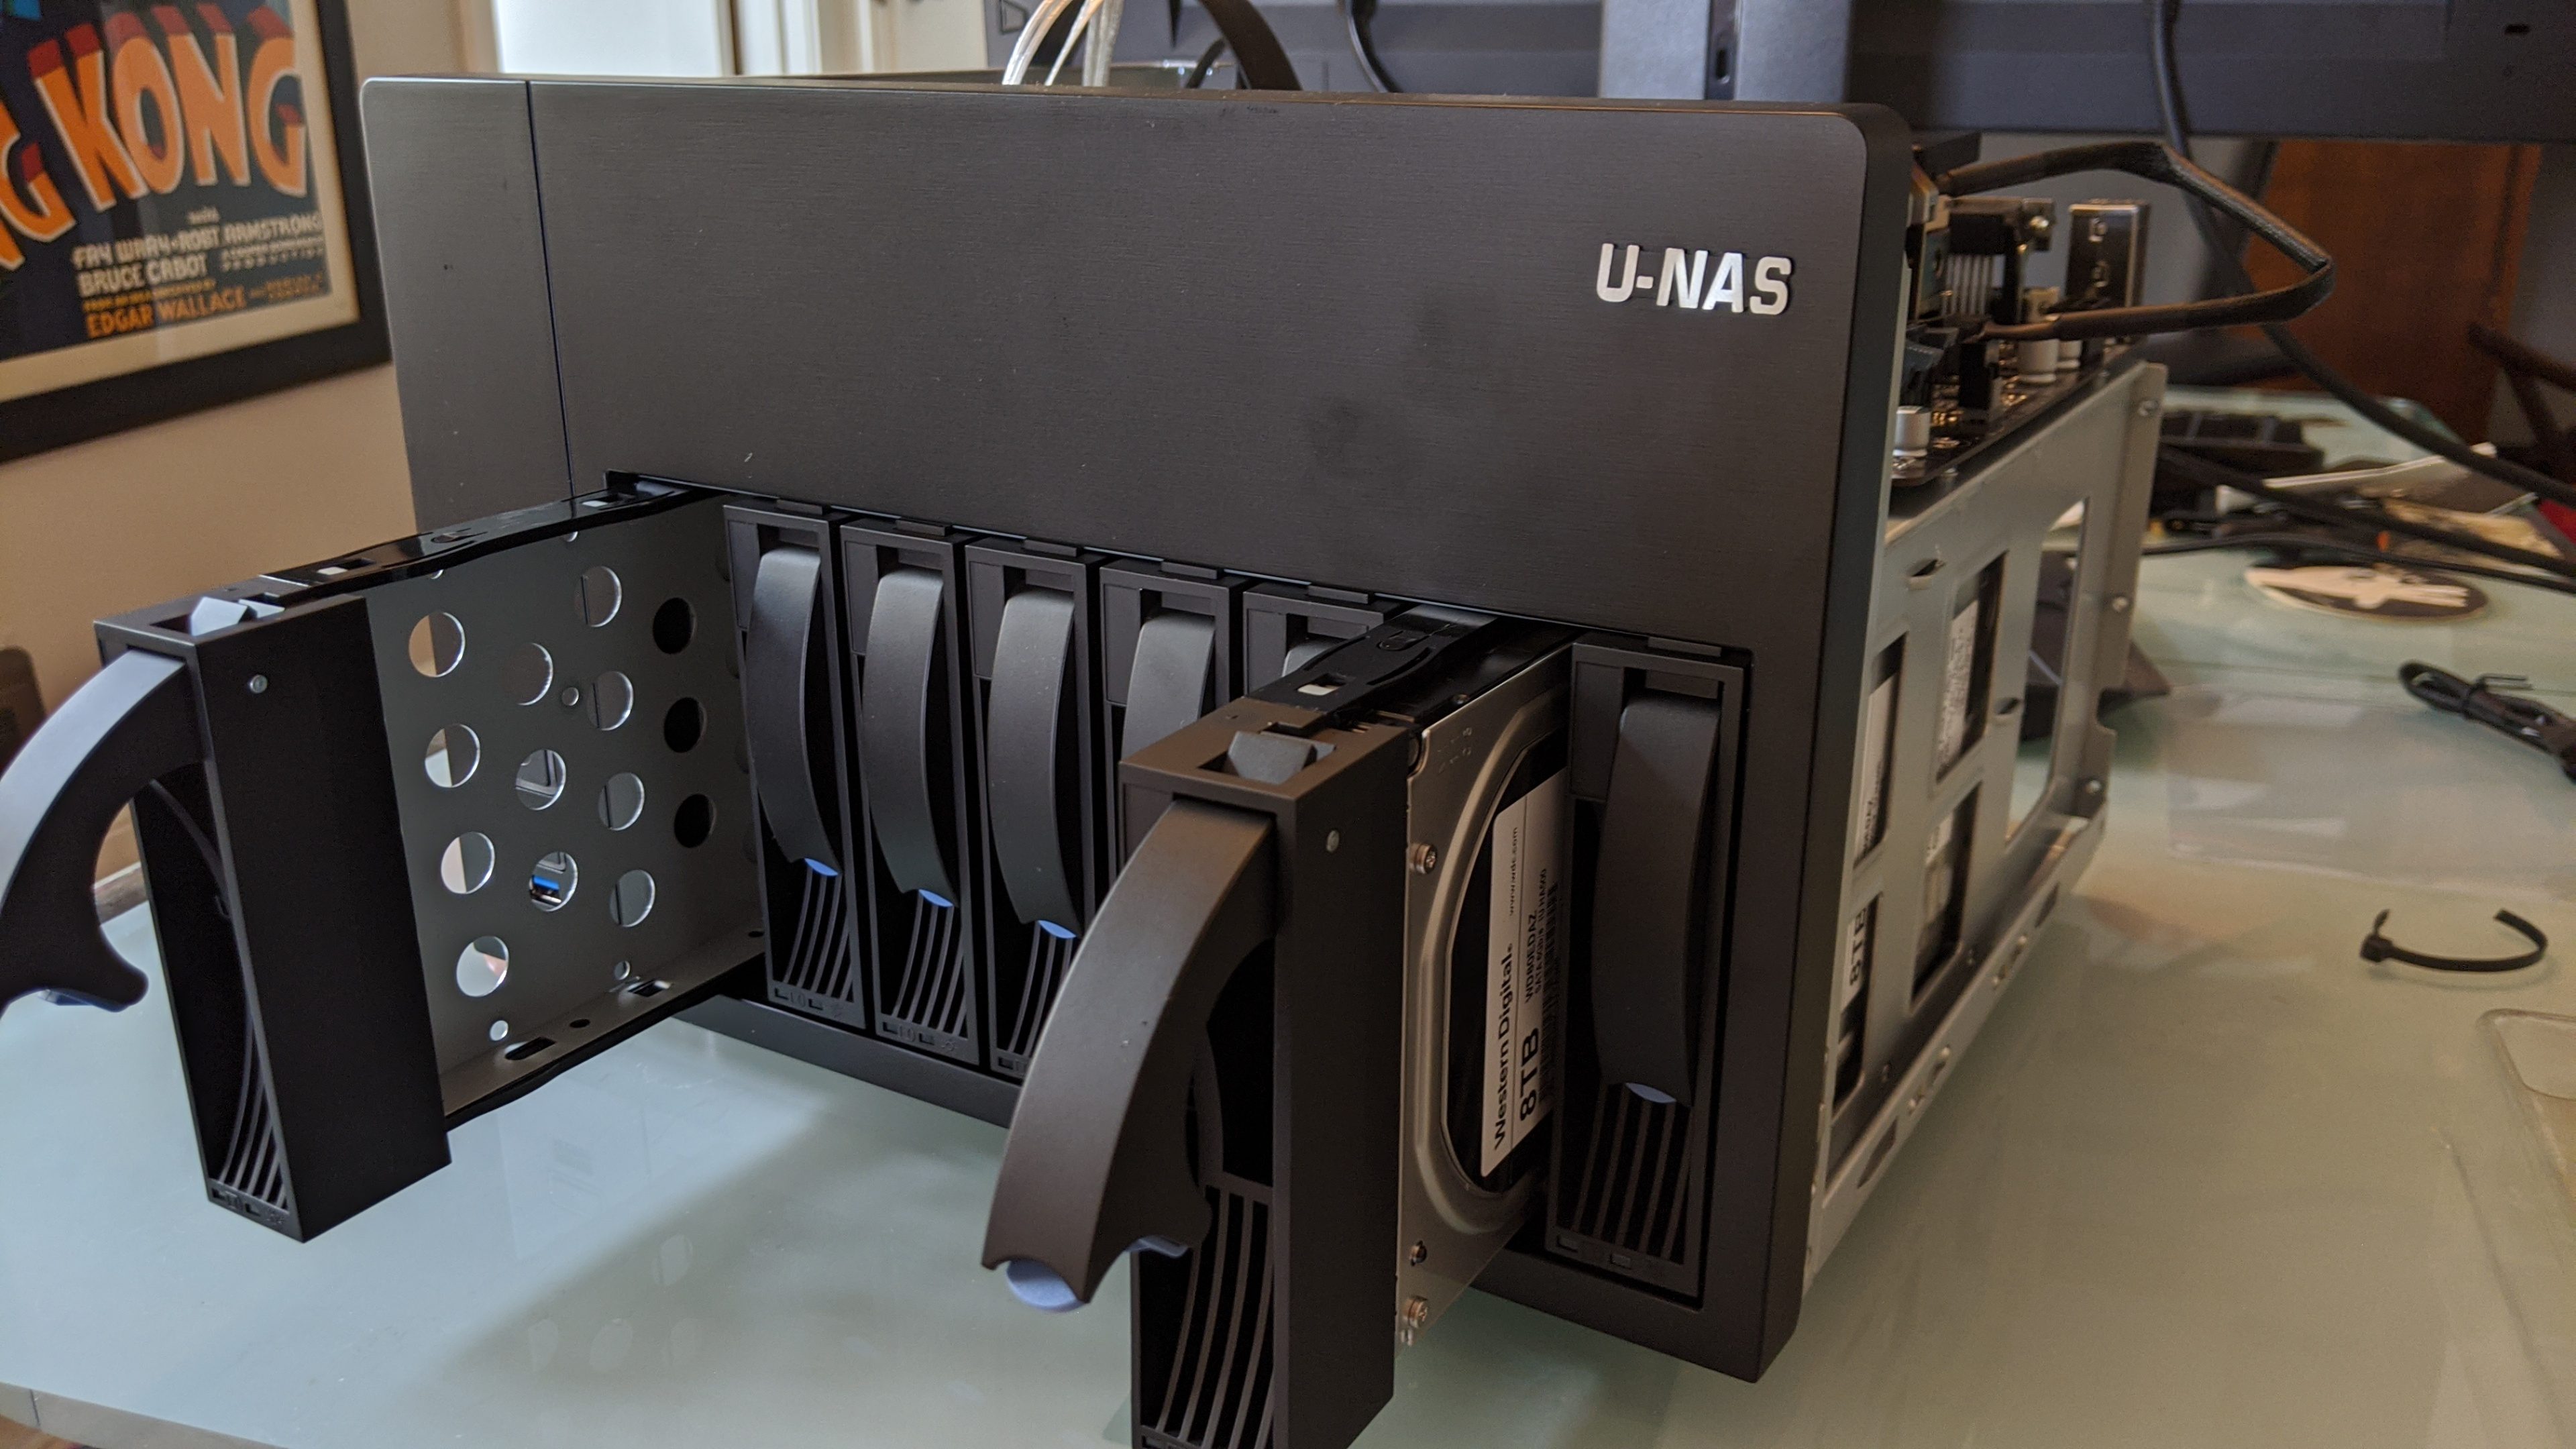 Finding the dream small footprint NAS chassis.